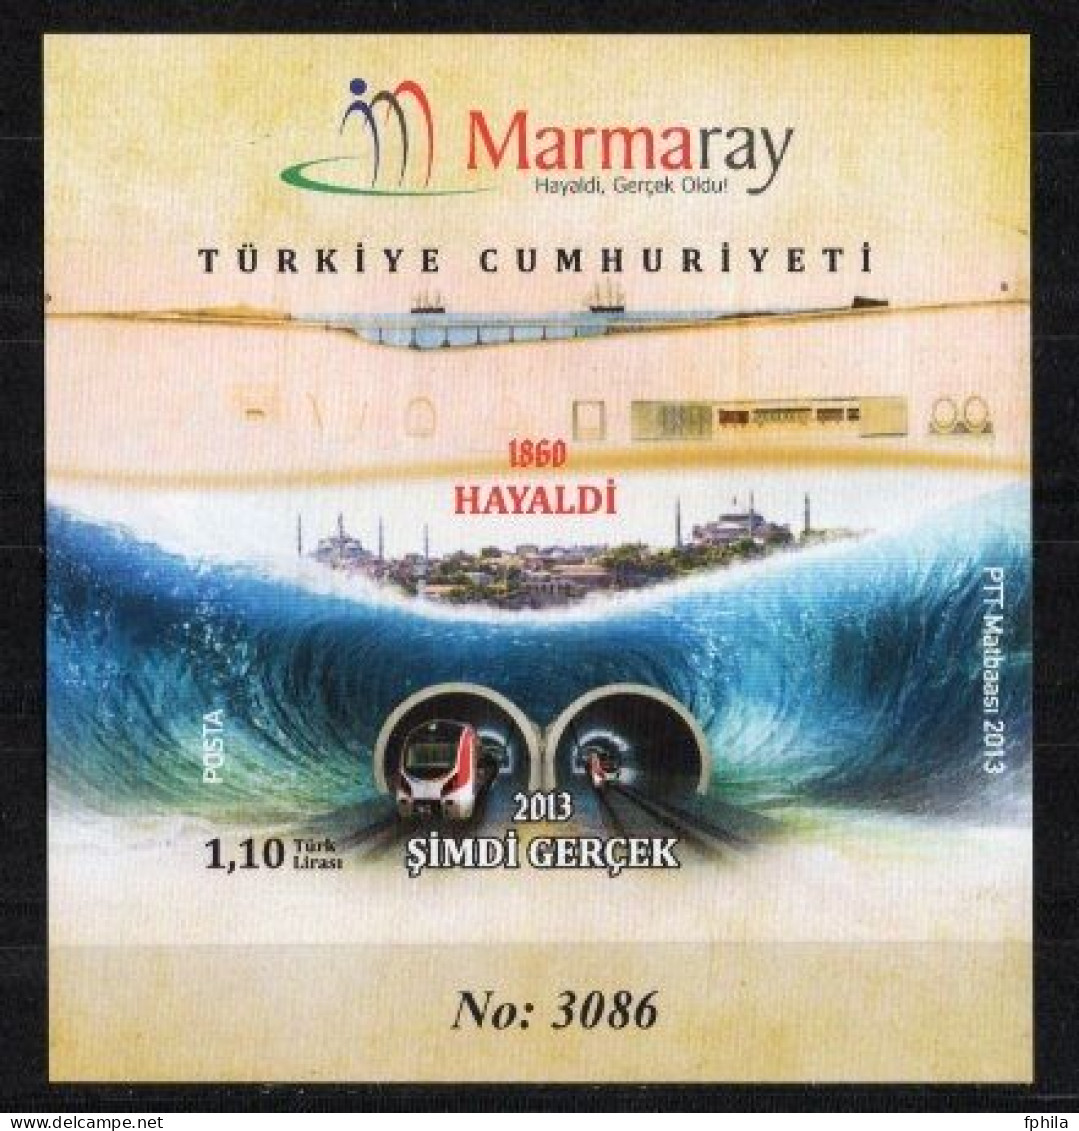 2013 TURKEY MARMARAY WAS ONCE A DREAM, NOW IT'S REALITY - TRAINS , SUBWAY IMPERFORATED SOUVENIR SHEET MNH ** - Blocs-feuillets